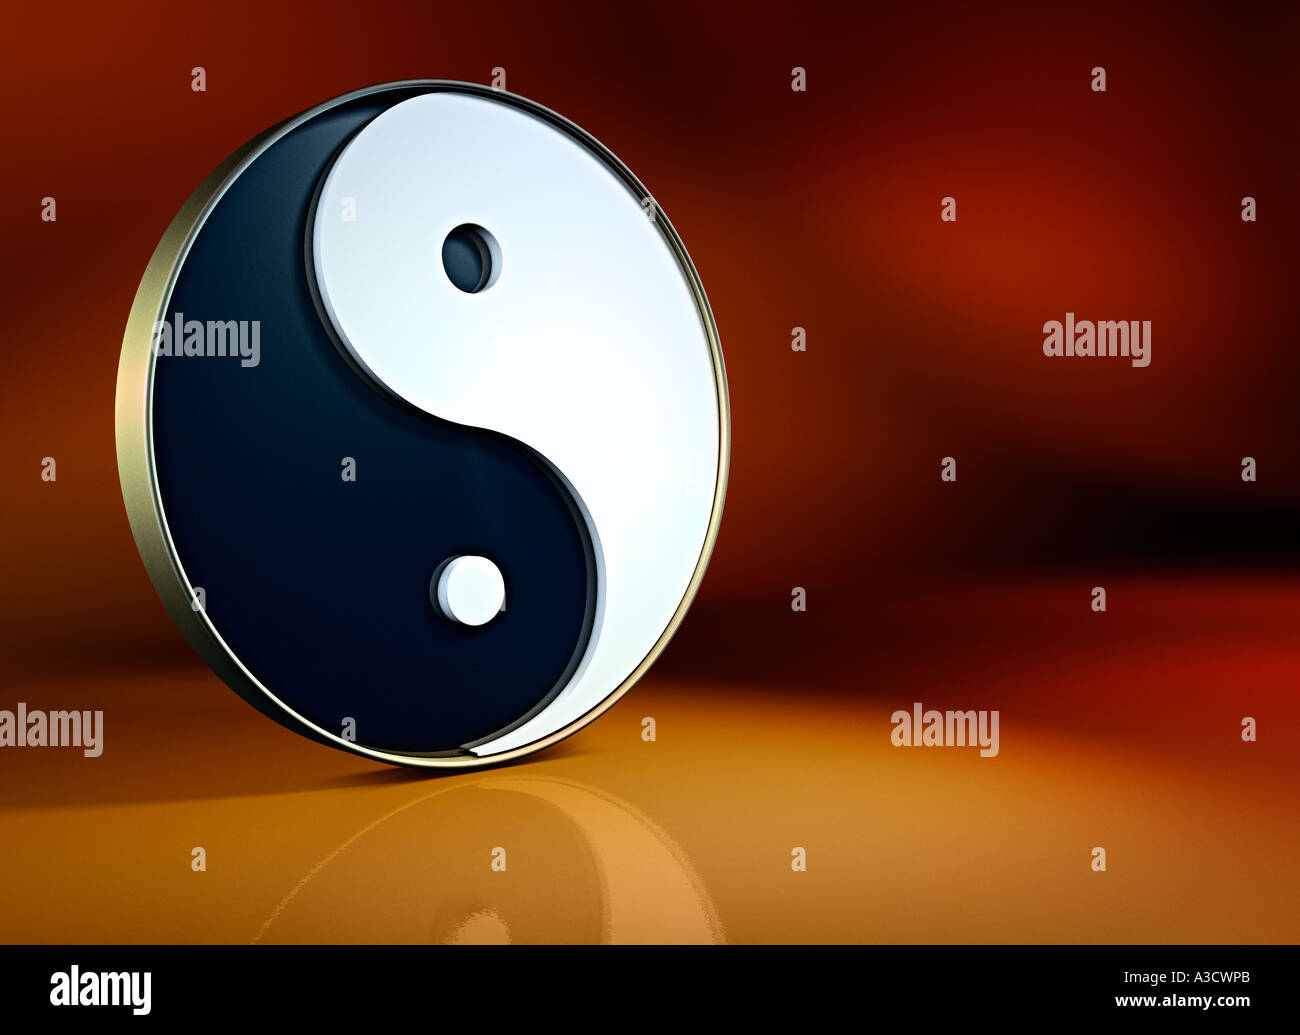 Taiji Symbol Of Yin And Yang Yin And Yang Are Two Terms Of The Chinese